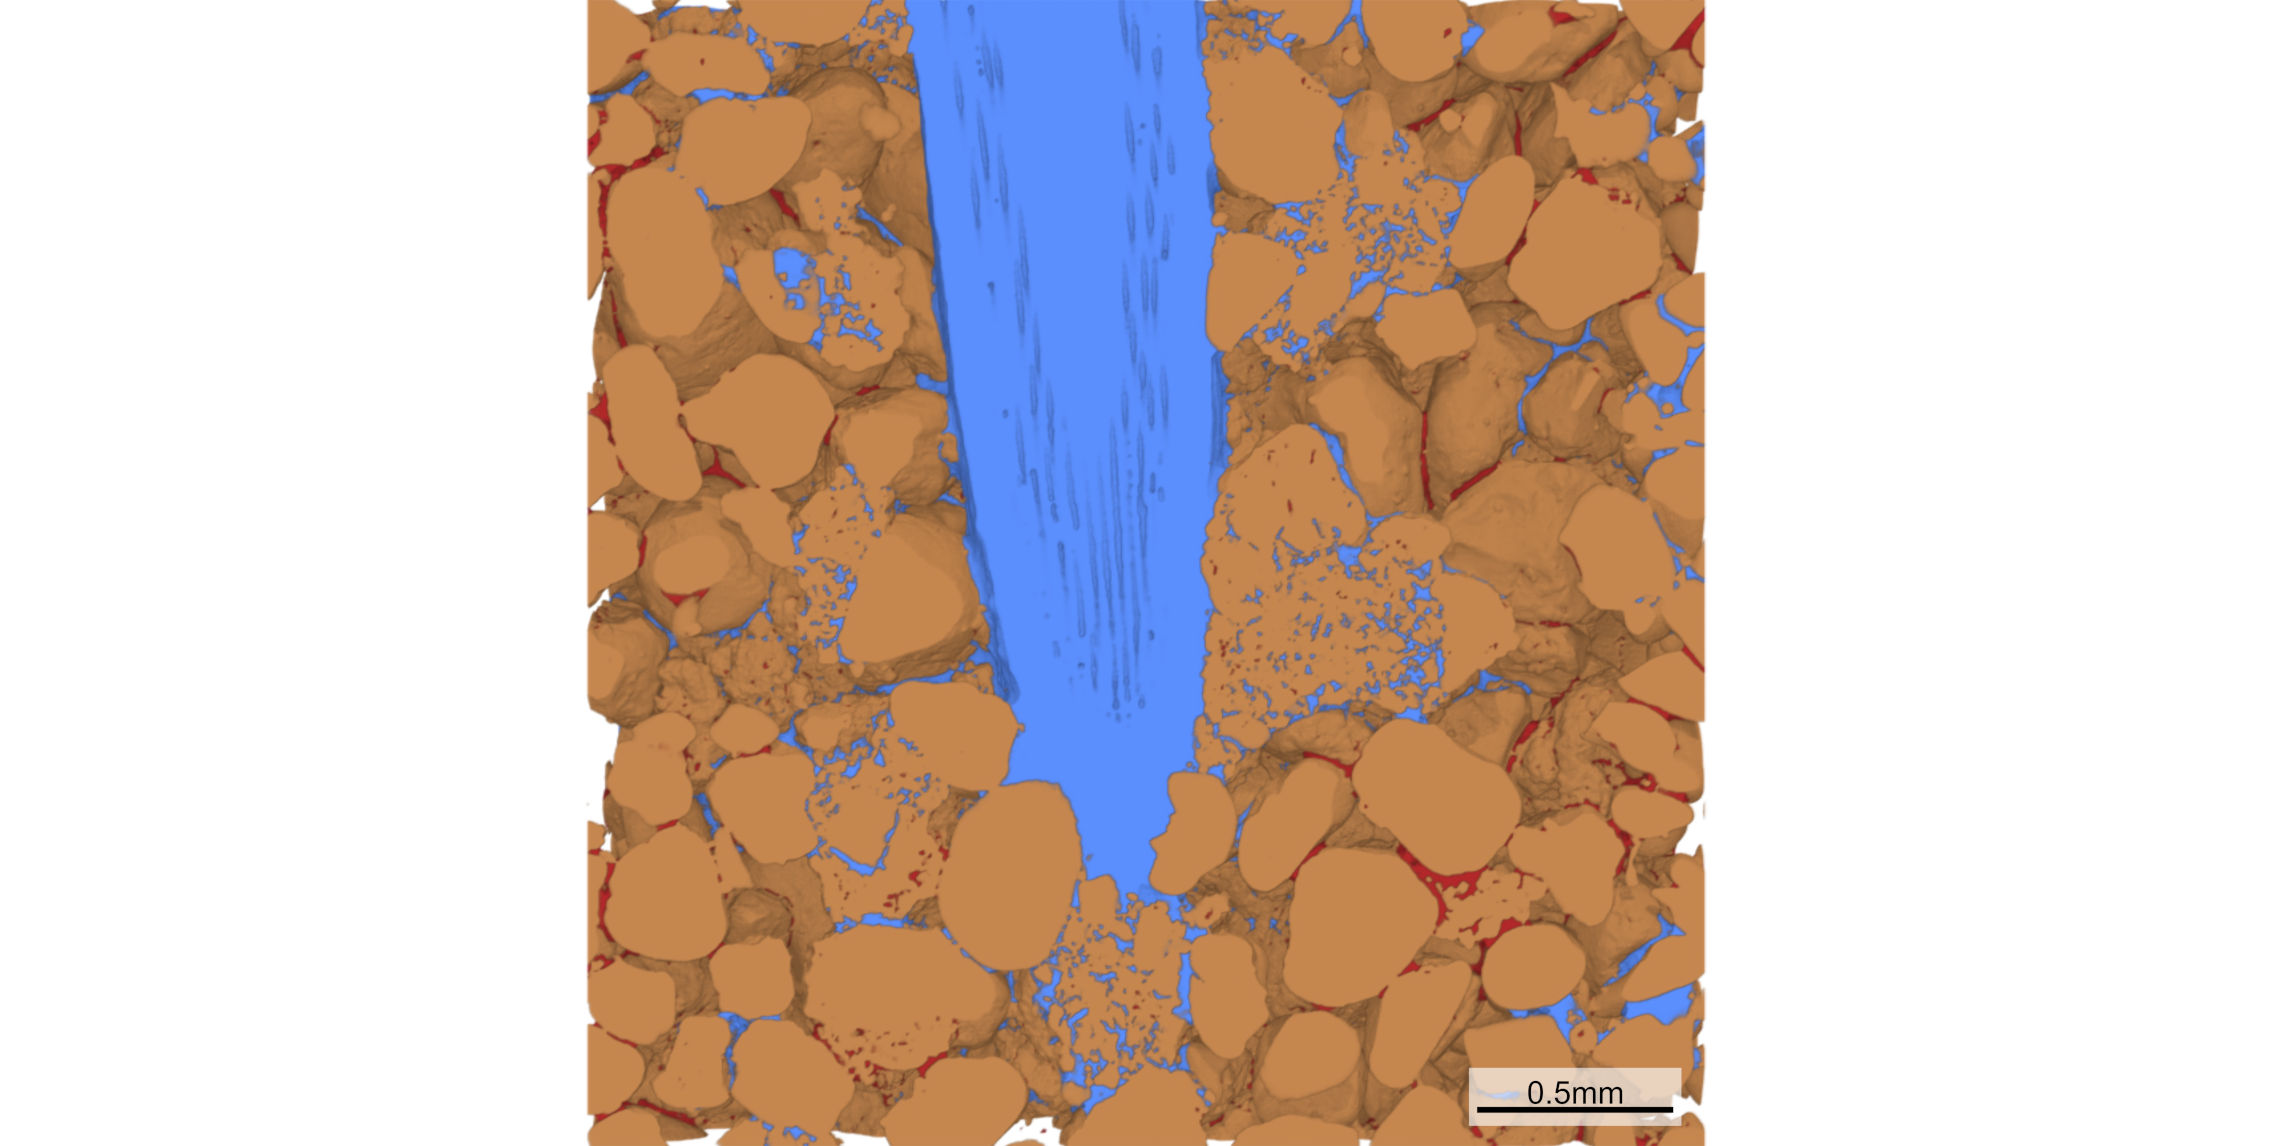 Enlarged view: Liquid architecture of soil biological hotspots